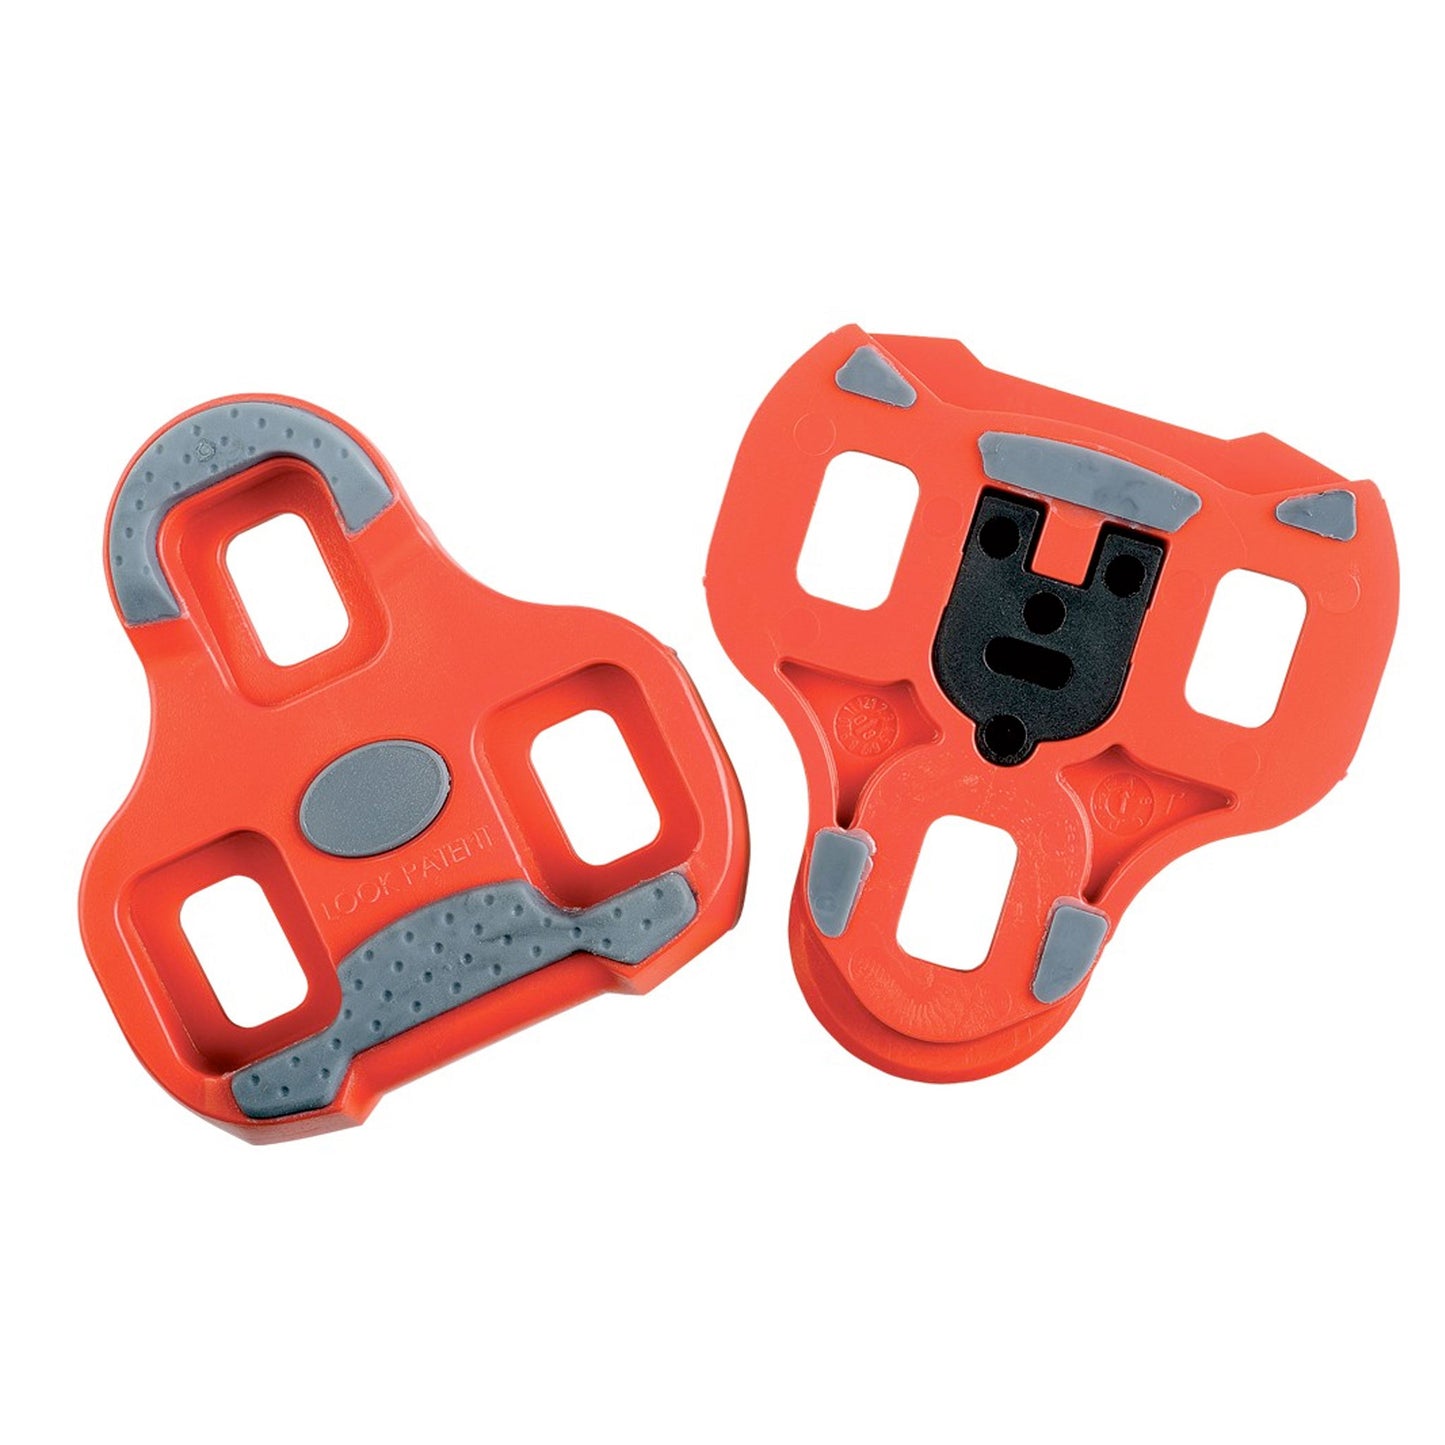 Look Cleo Grip Cleats - Red 9 degree movement